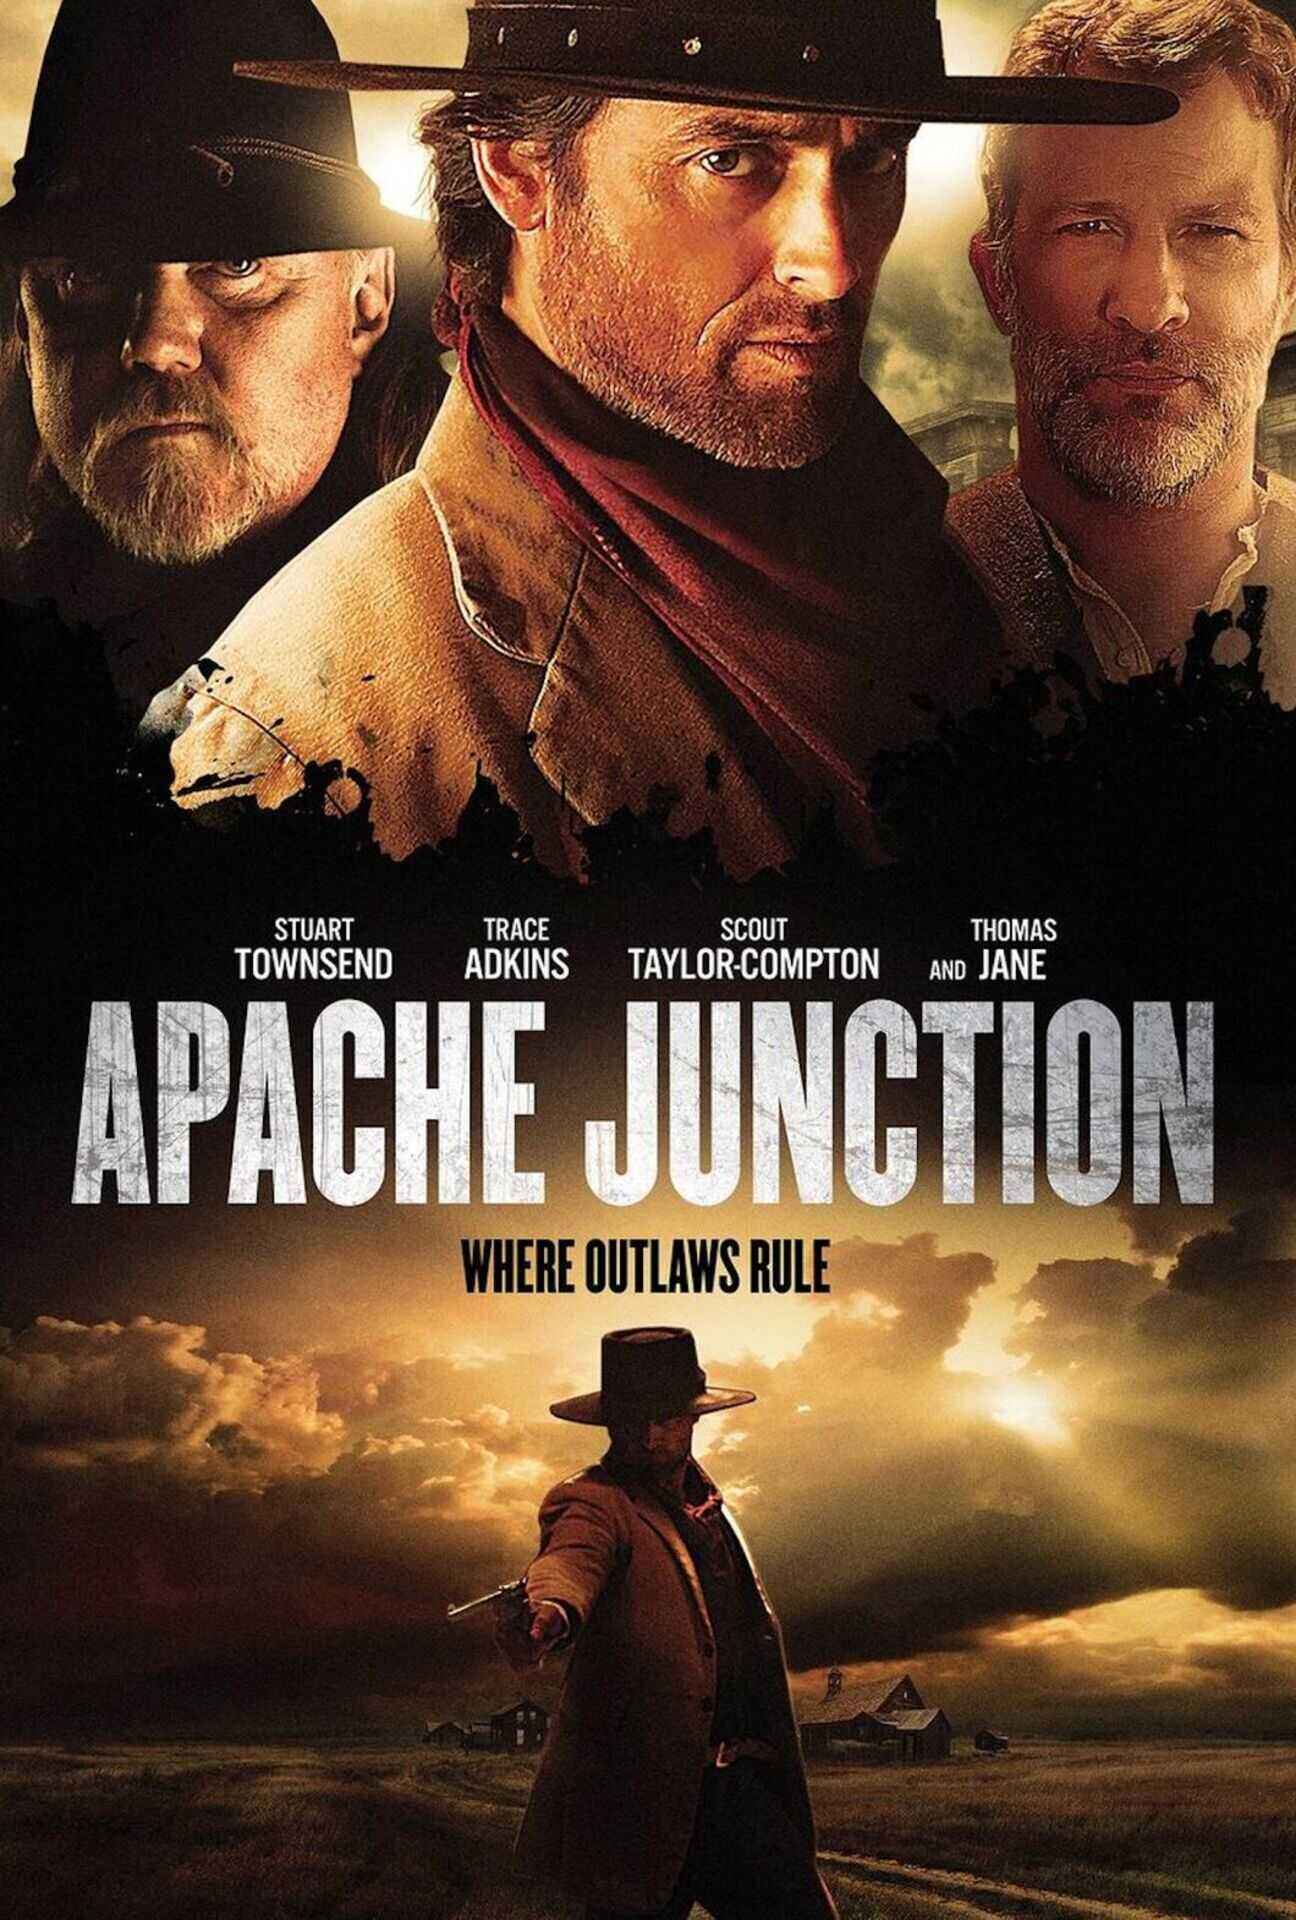 Theatrical poster for Apache Junction, directed by Justin Lee.